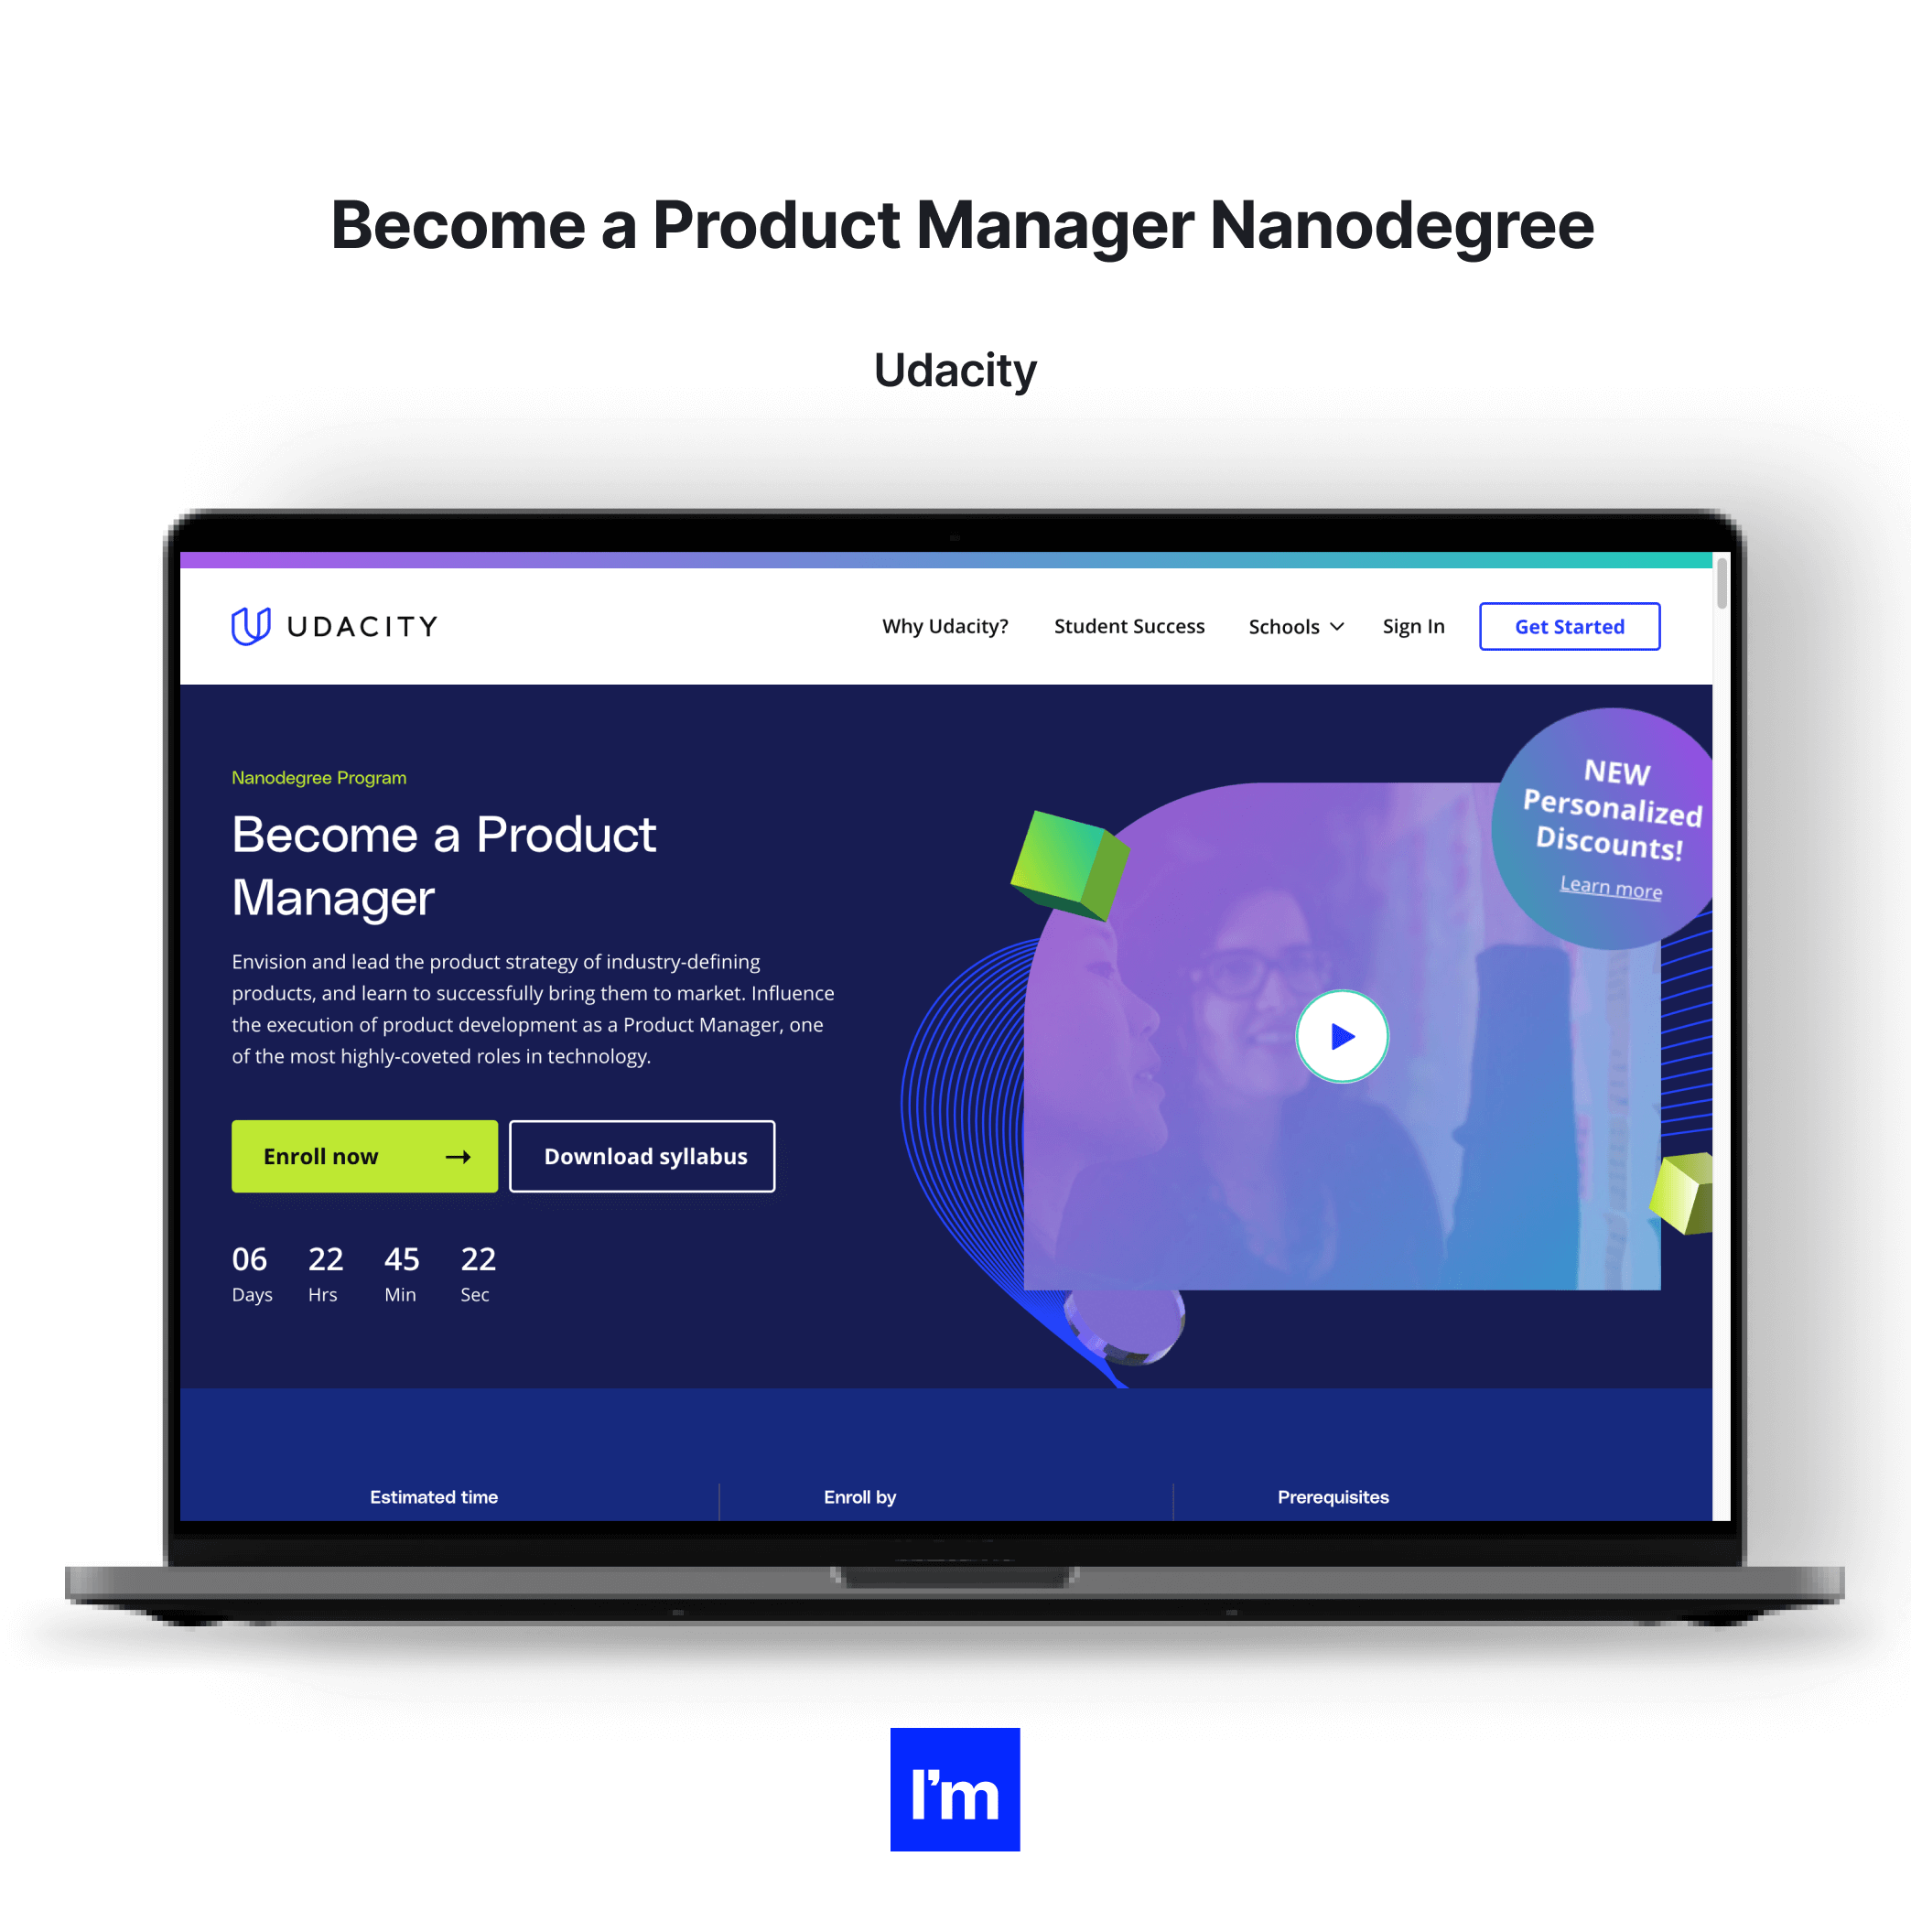 Top 10 Product Management Certification Programs - Become a Product Manager Nanodegree